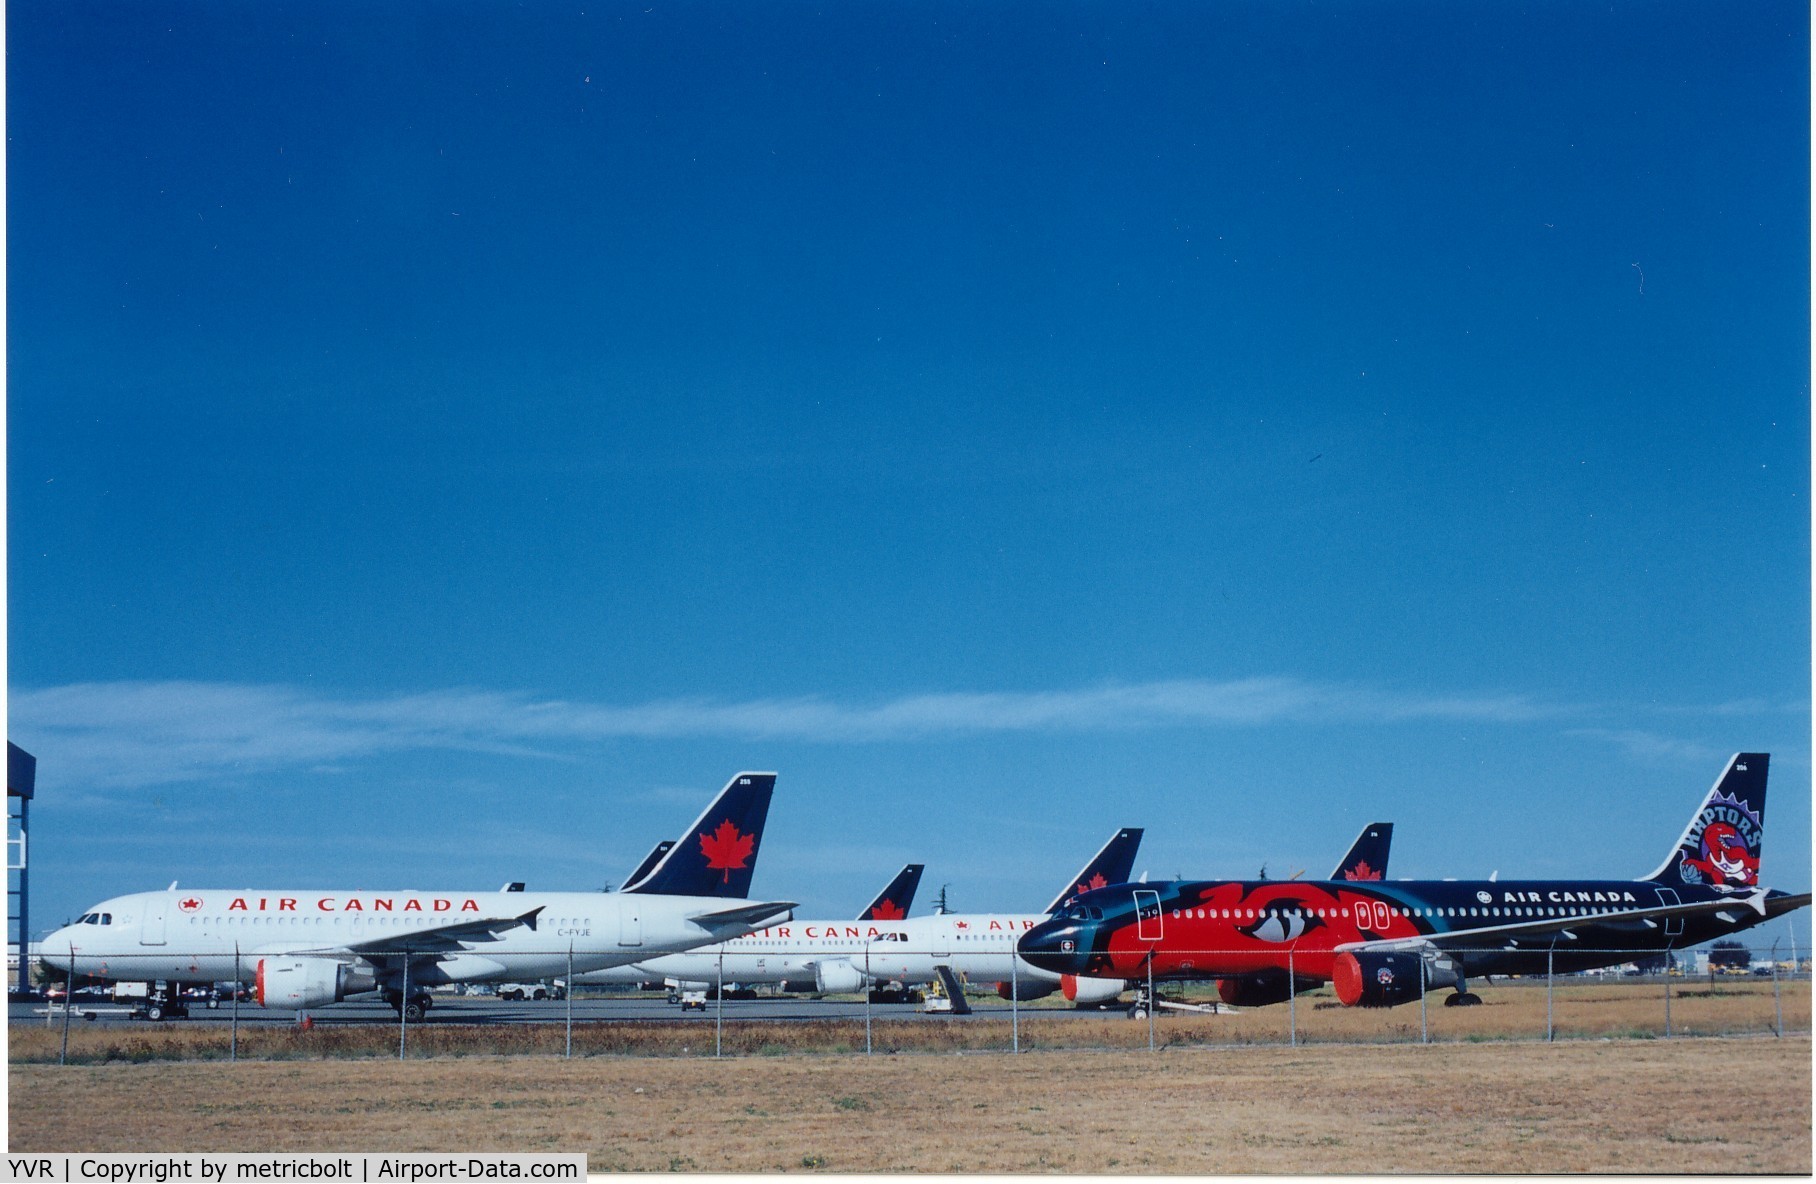 Vancouver International Airport, Vancouver, British Columbia Canada (YVR) - Air Canada fleet grounded by pilots strike.Sep.1998